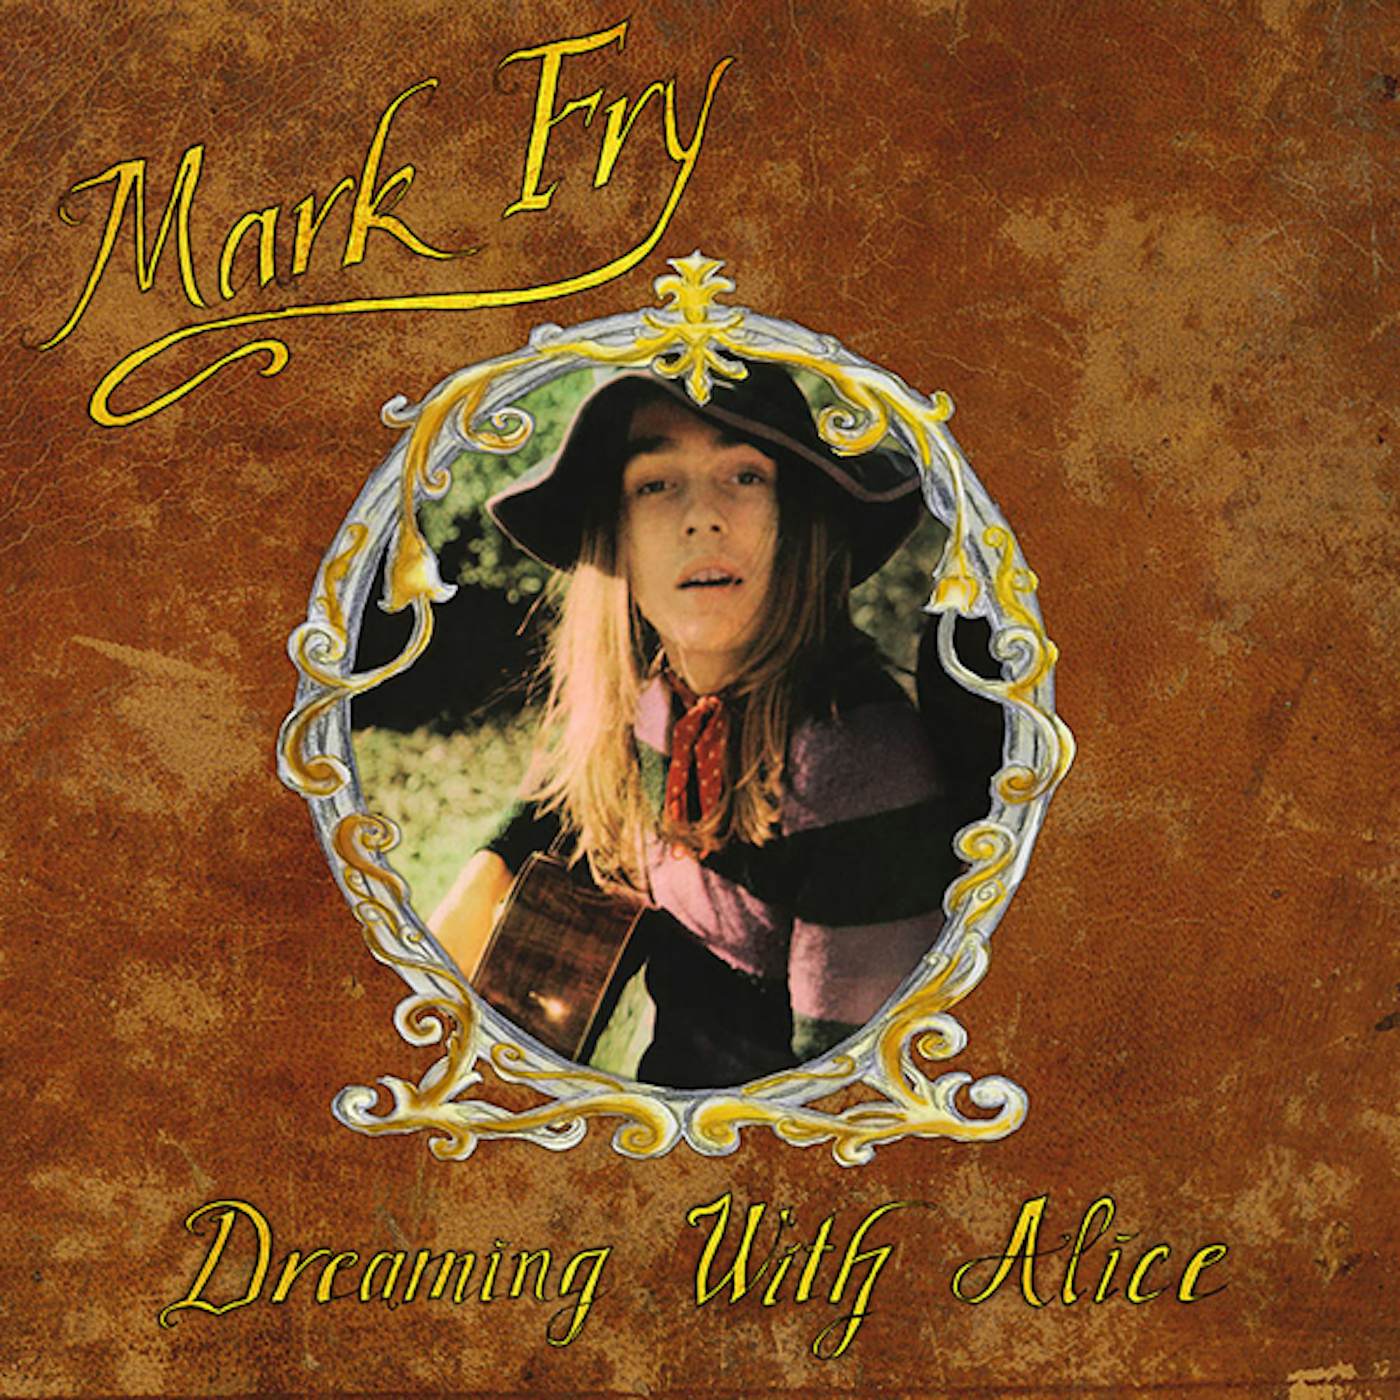 Mark Fry Dreaming with Alice Vinyl Record